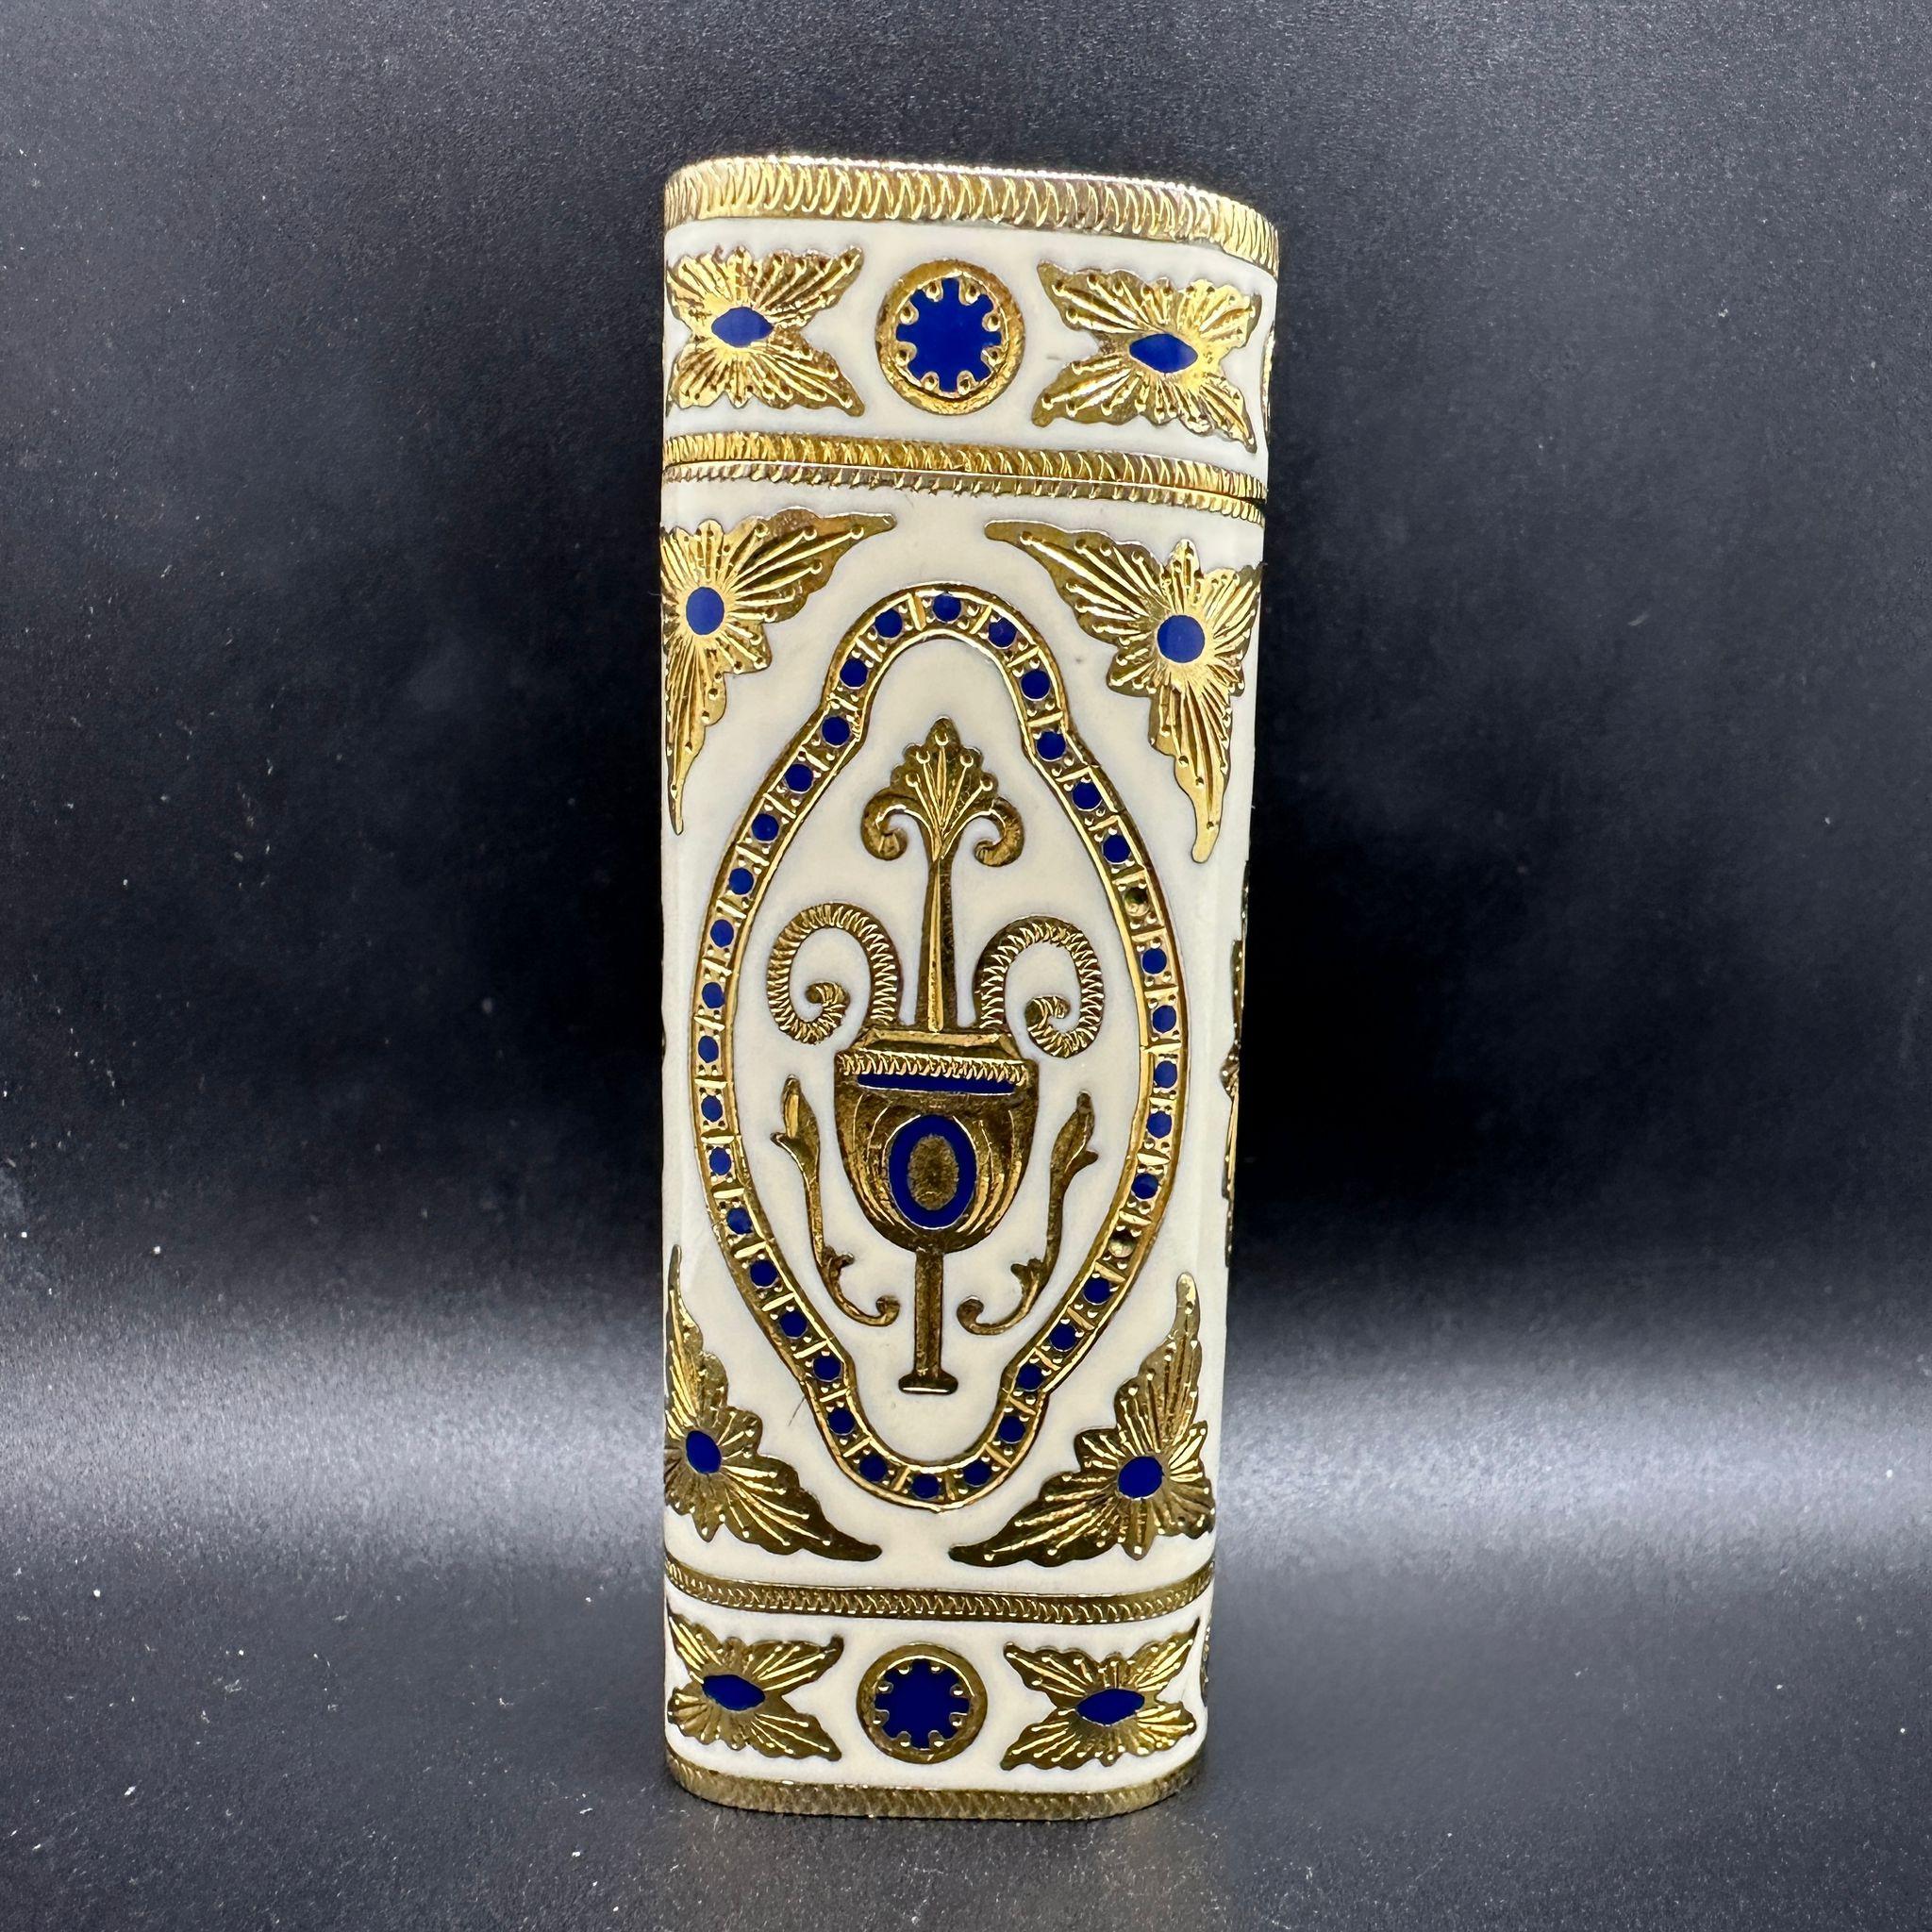 Cartier “Royking” lighter.
Circe 1970
CARTIER  Roy King Rollagas, a Unique RARE example of a ROYKING designed Cartier Rollagas lighter made circa 1970's, 18K Gold Baroque Inlay with cream and blue  lacquer, mint condition.
Roy King emblem on top